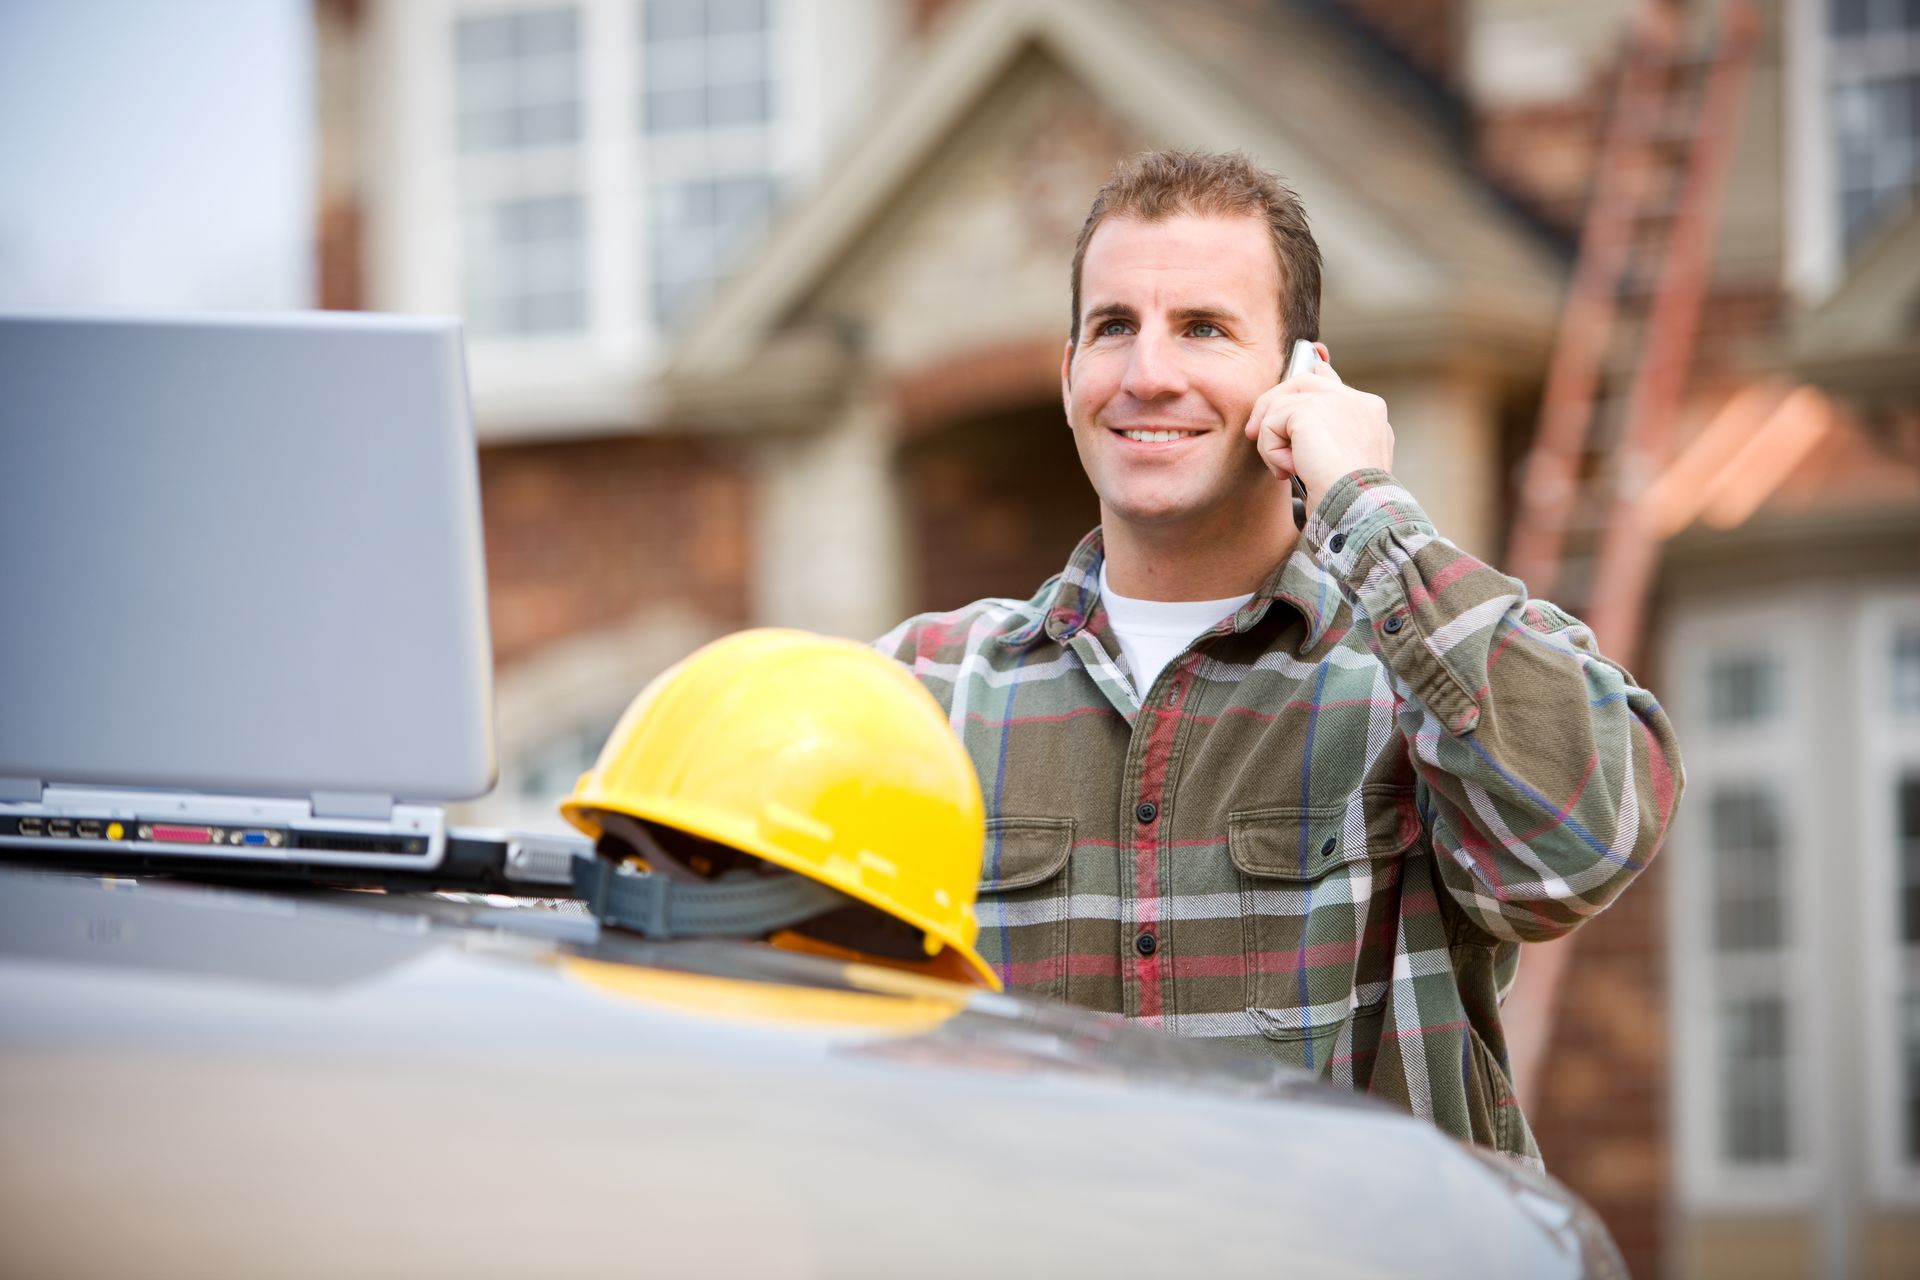 Home contractor on Phone